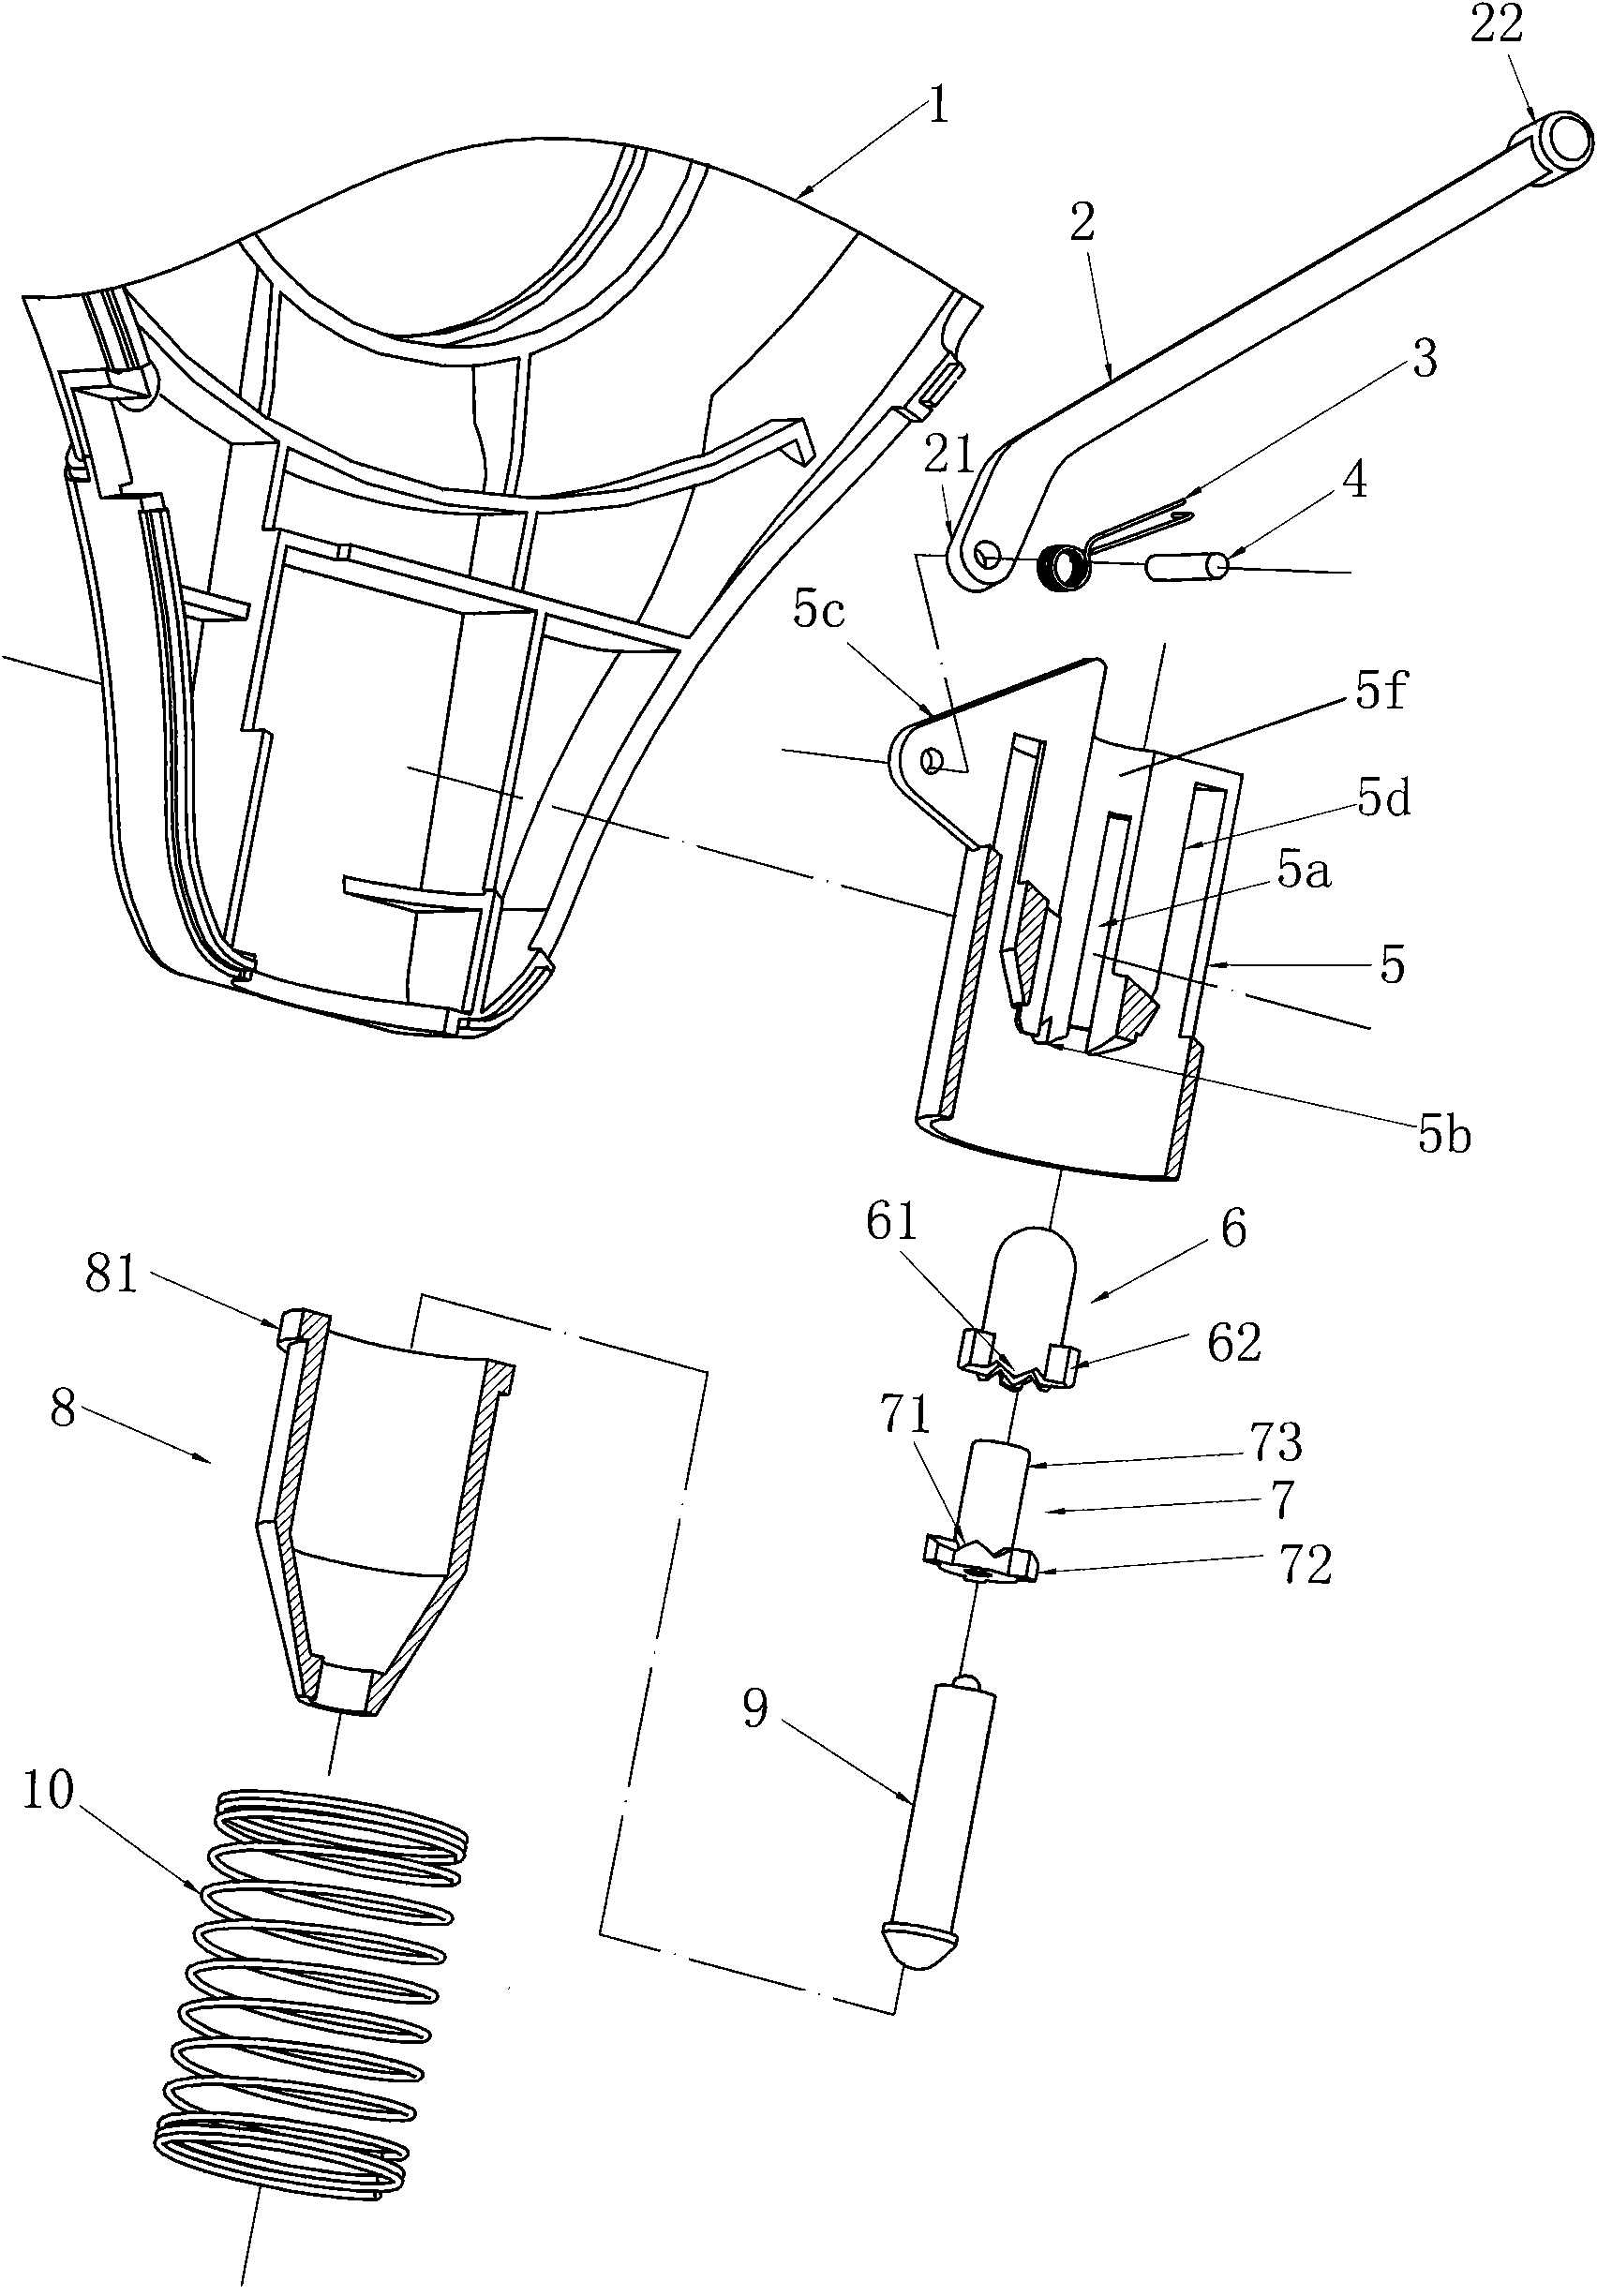 Measuring tape finial mechanism and measuring tape thereof